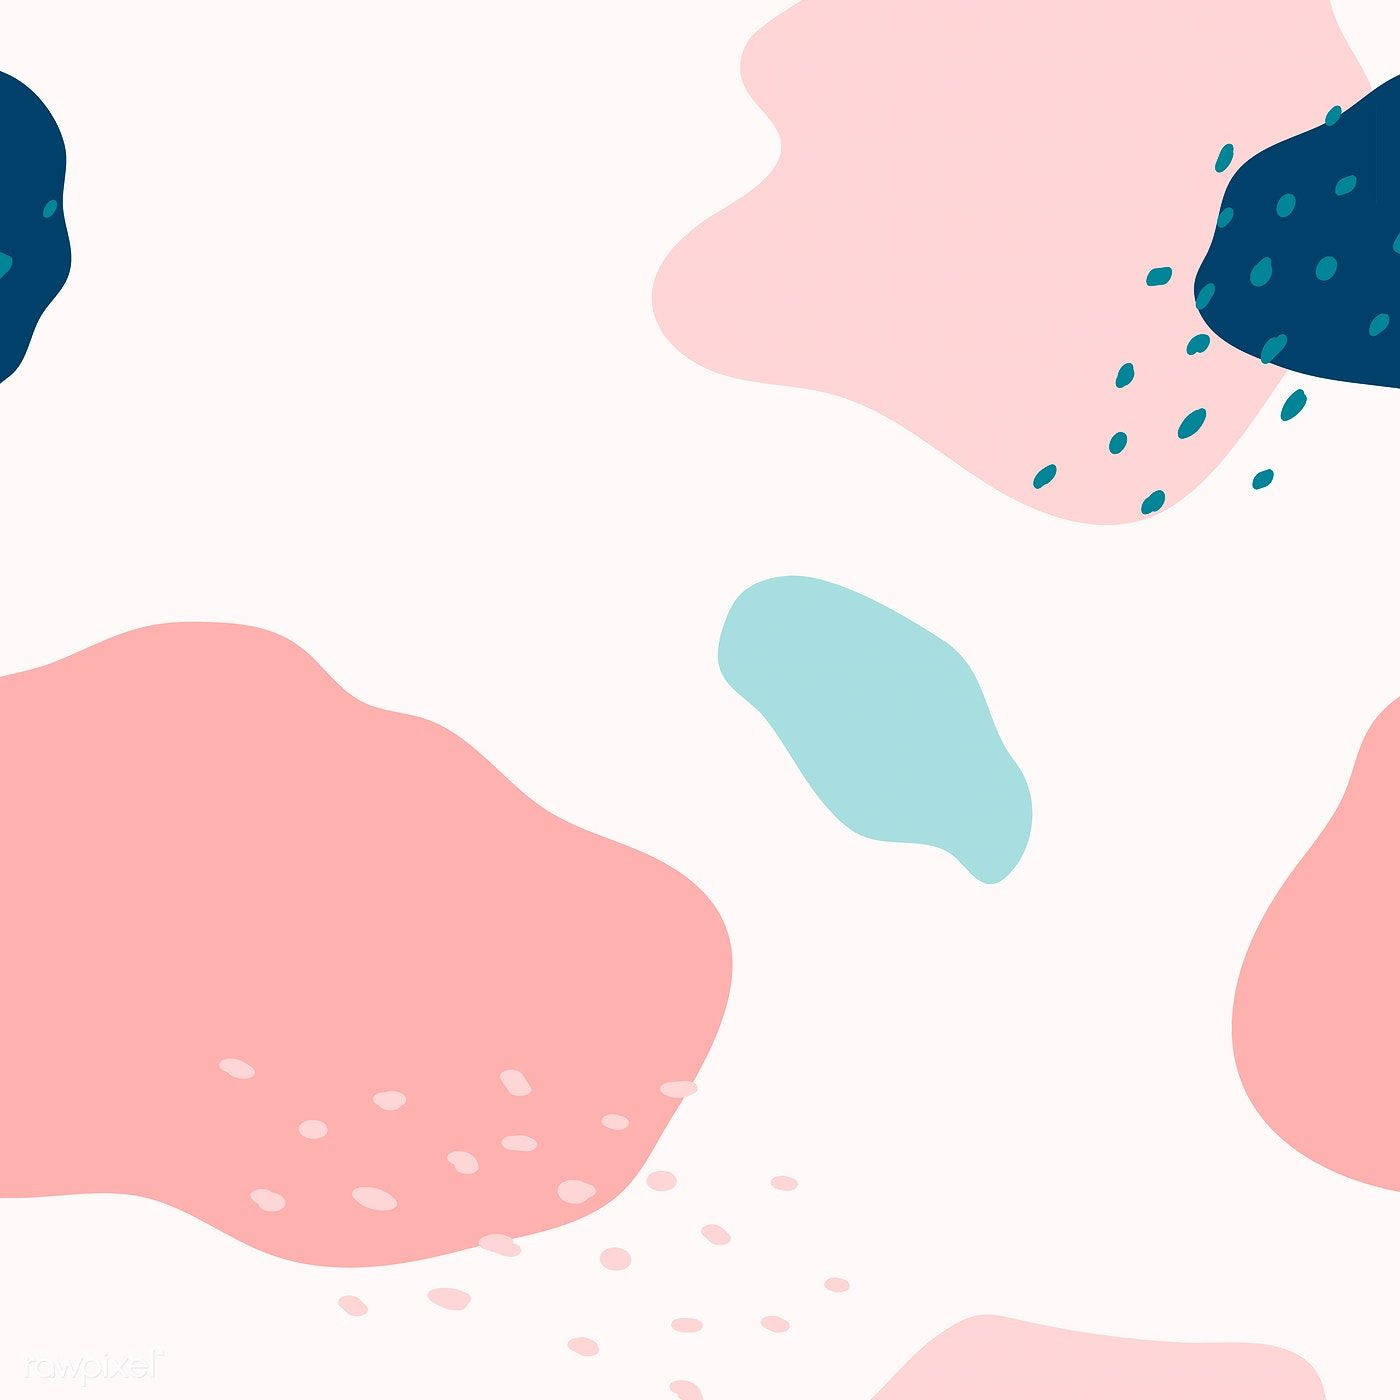 Cute Pastel Pink And Blue Blobs